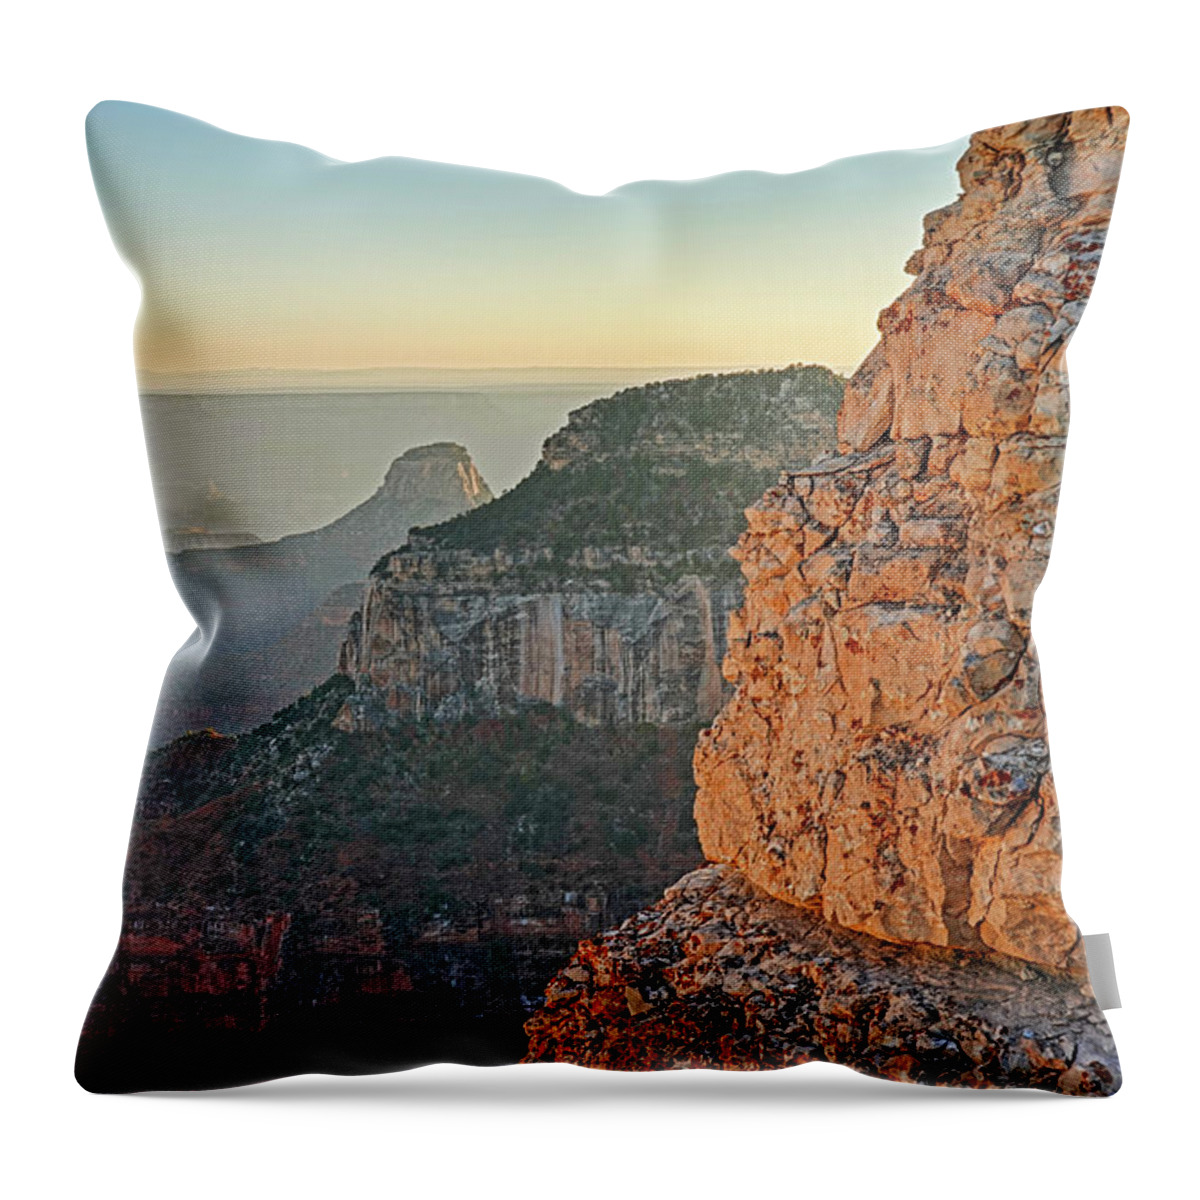 North Throw Pillow featuring the photograph Layered Rocks in the North Rim of the Grand Canyon at Sunset North Rim Arizona by Toby McGuire